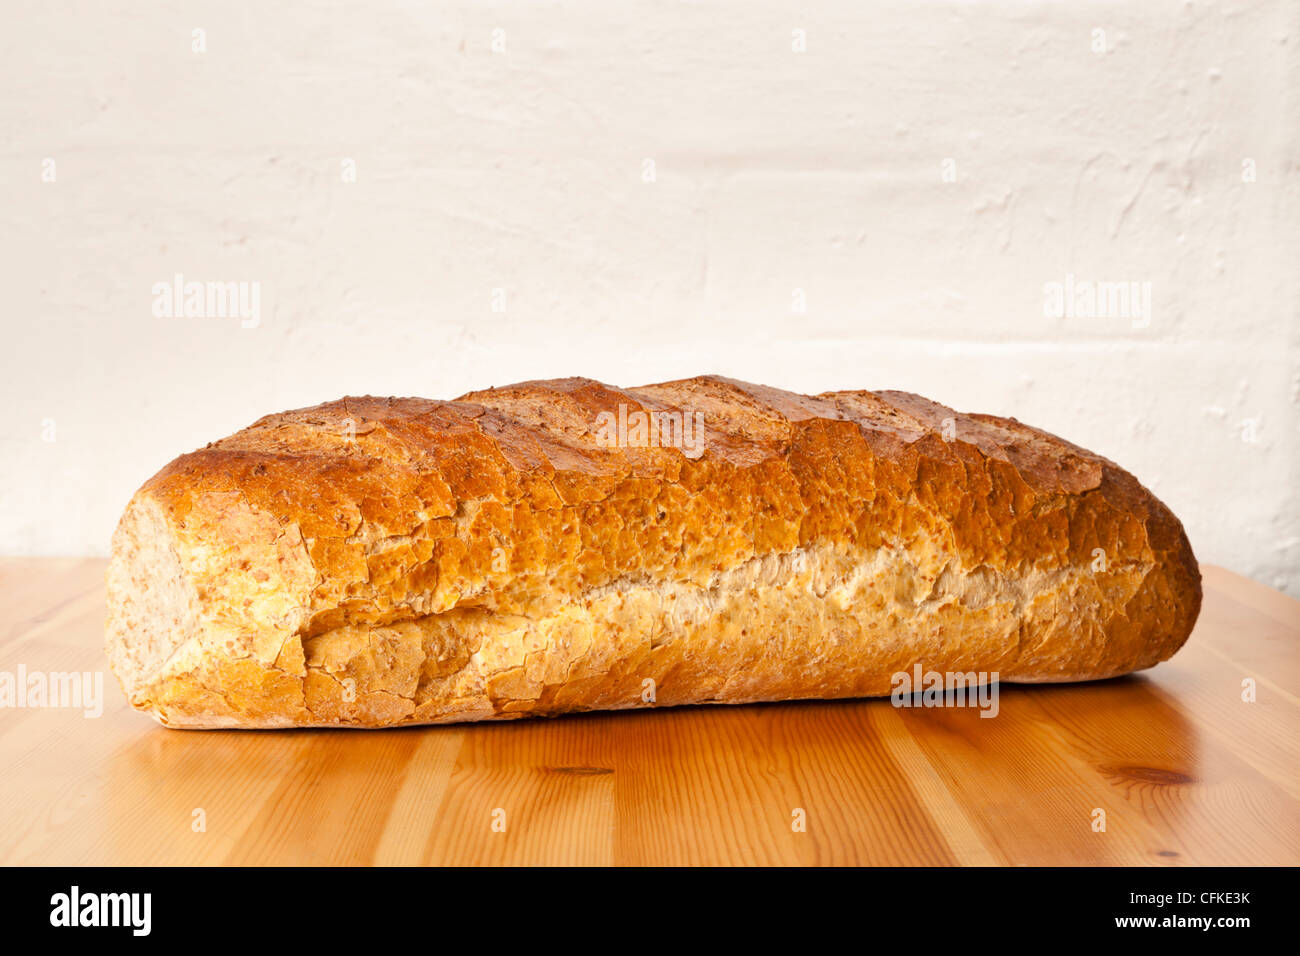 Loaf of brown wholemeal bread on a wooden table against a painted brick wall Stock Photo